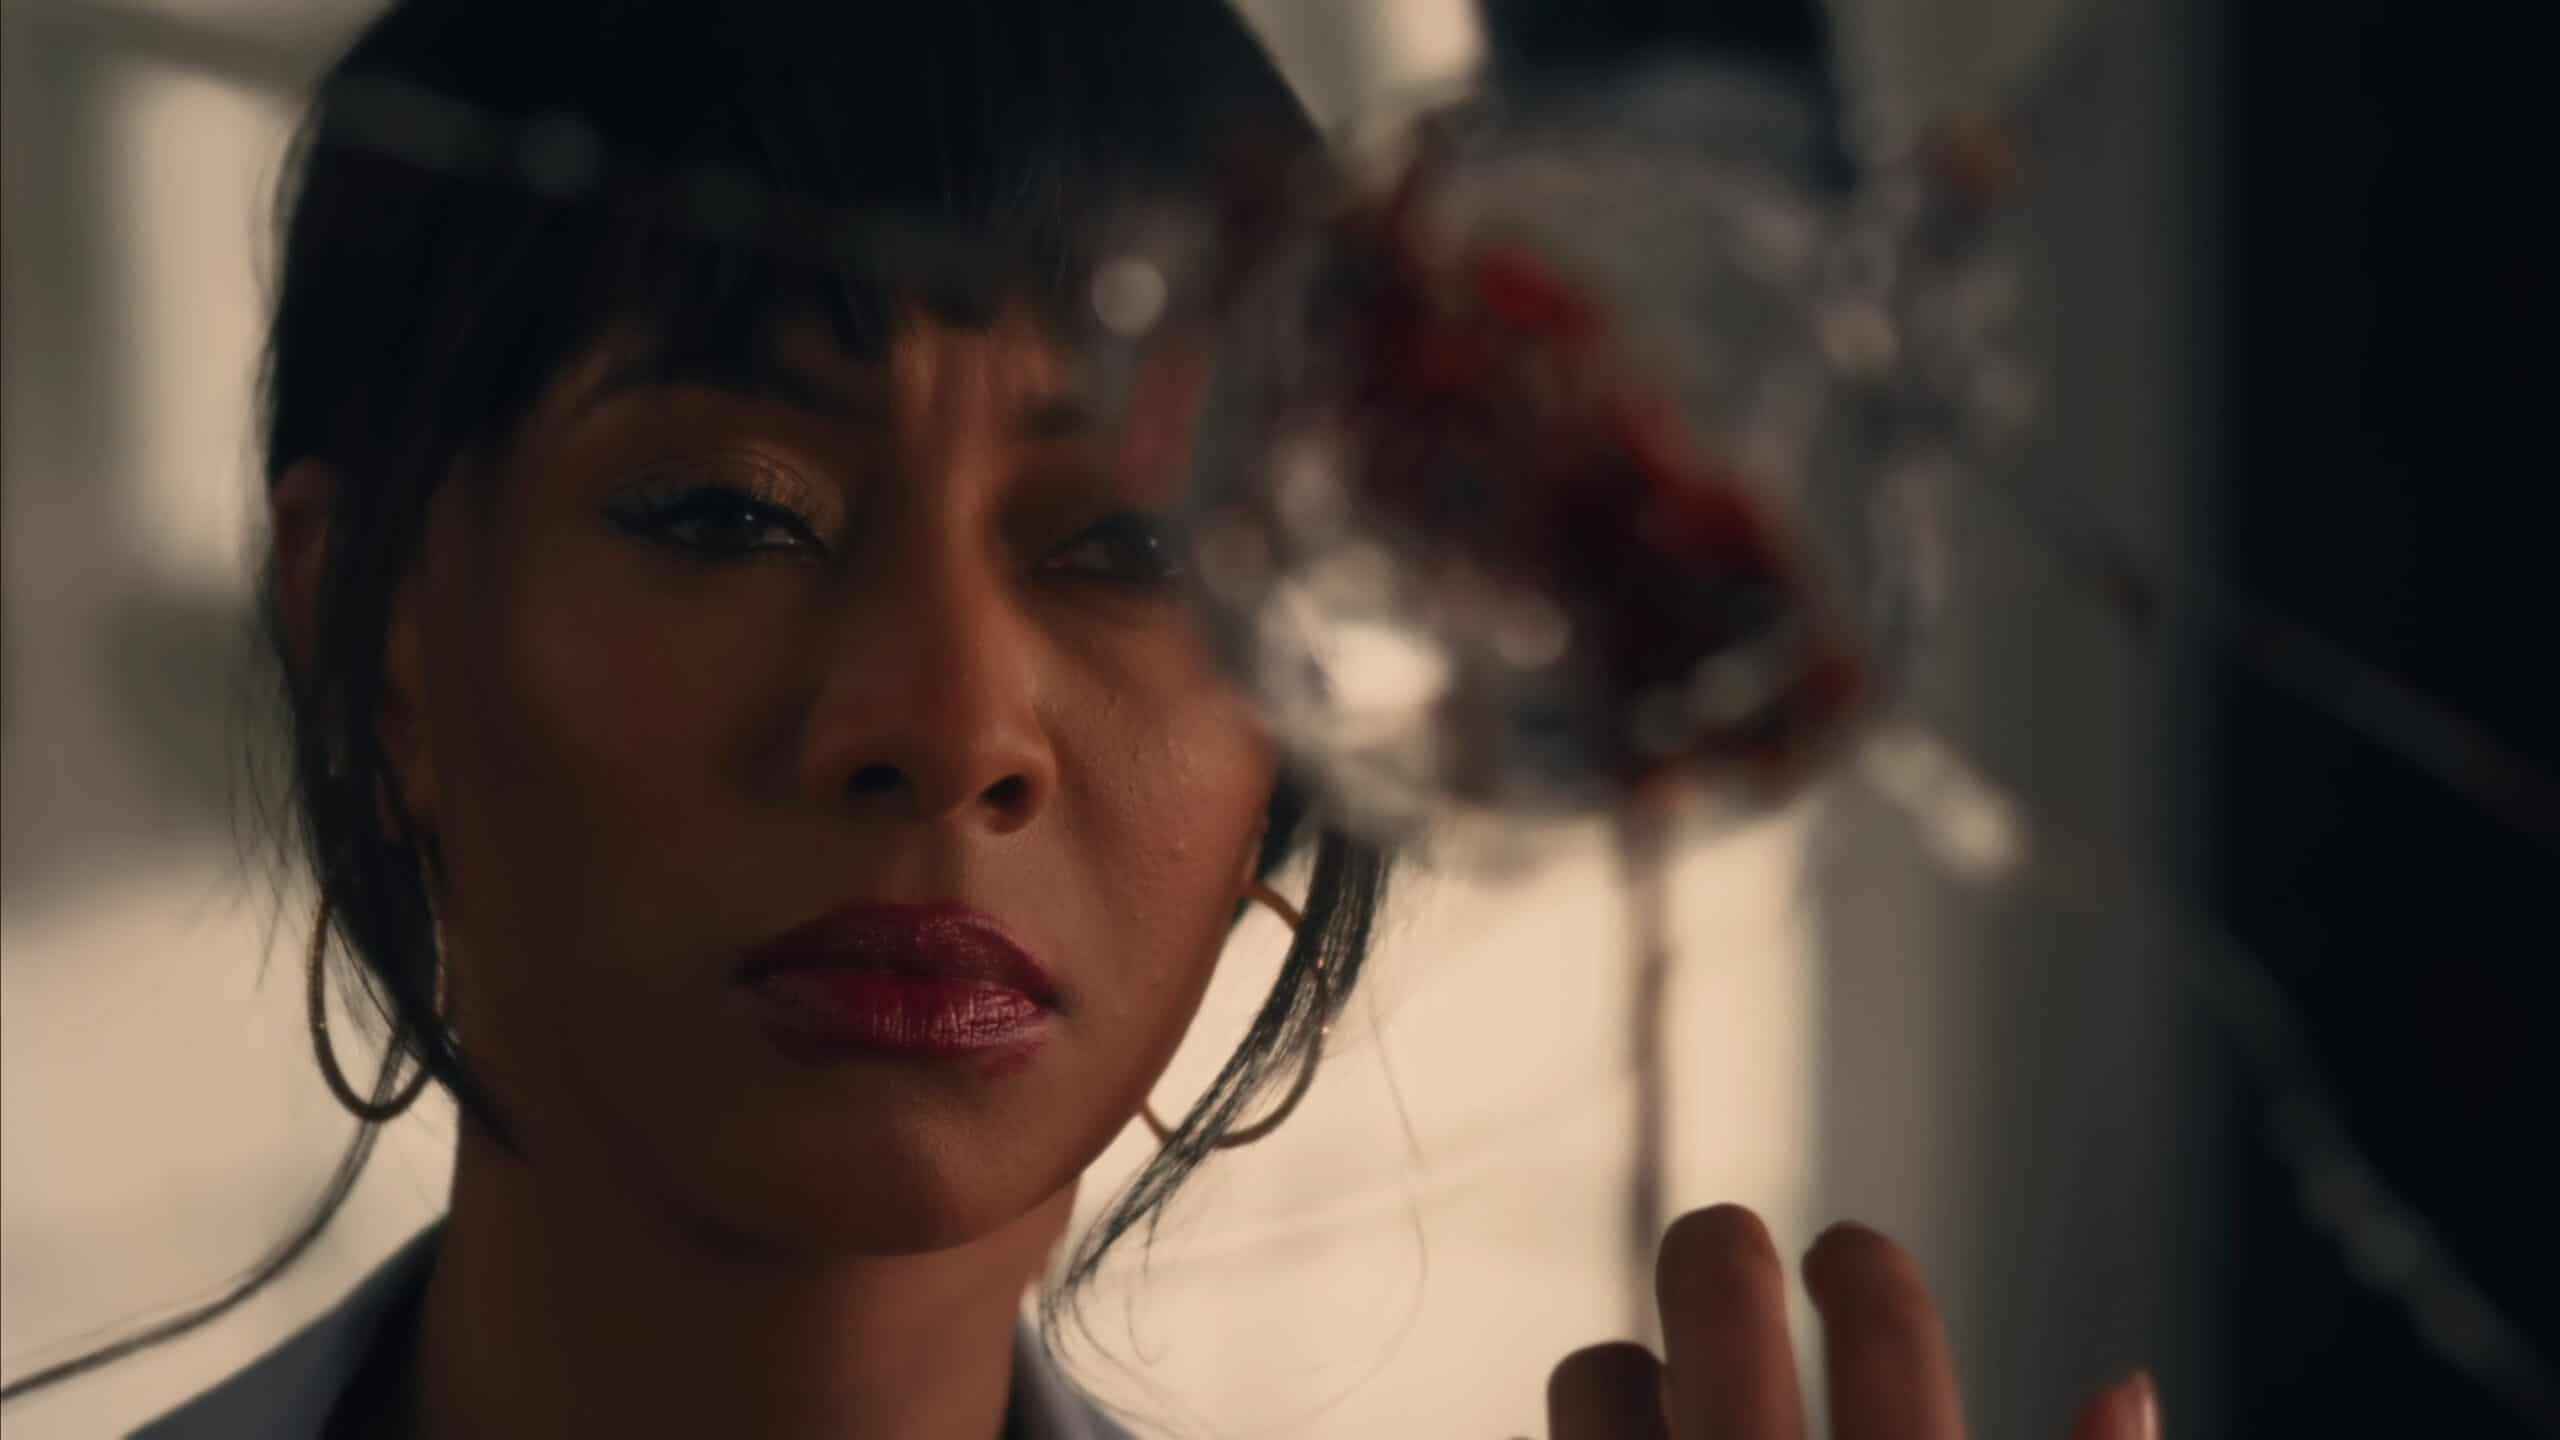 Dr. Alexis Torres (Keri Hilson) after punching a mirror